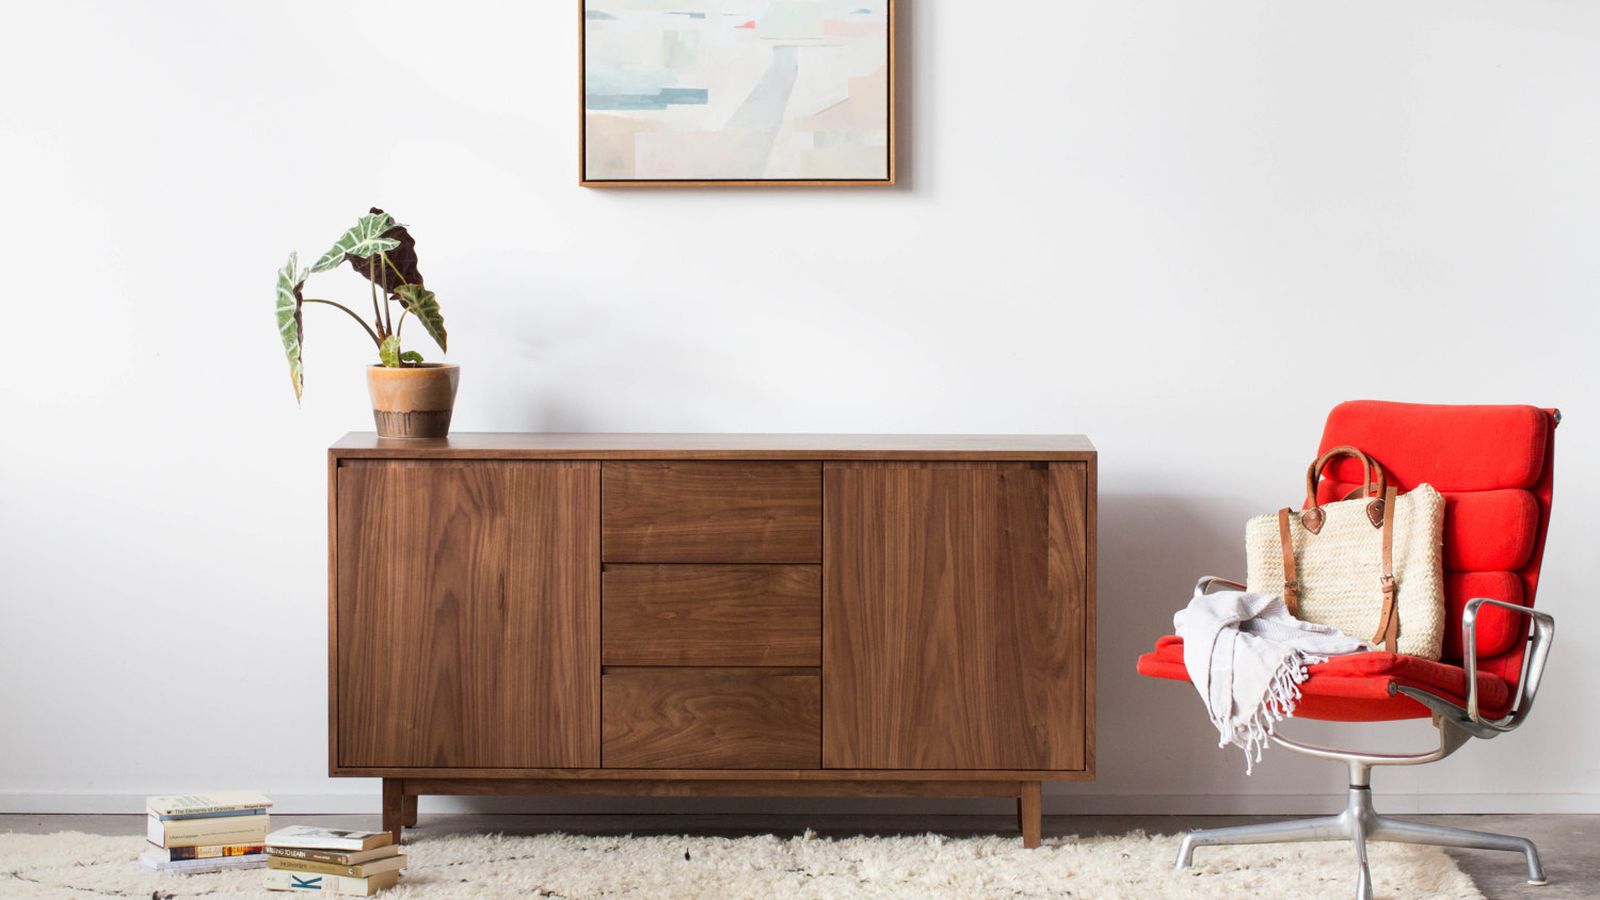 Lock Barry county Etsy furniture shops: 7 best stores to check out now - Curbed